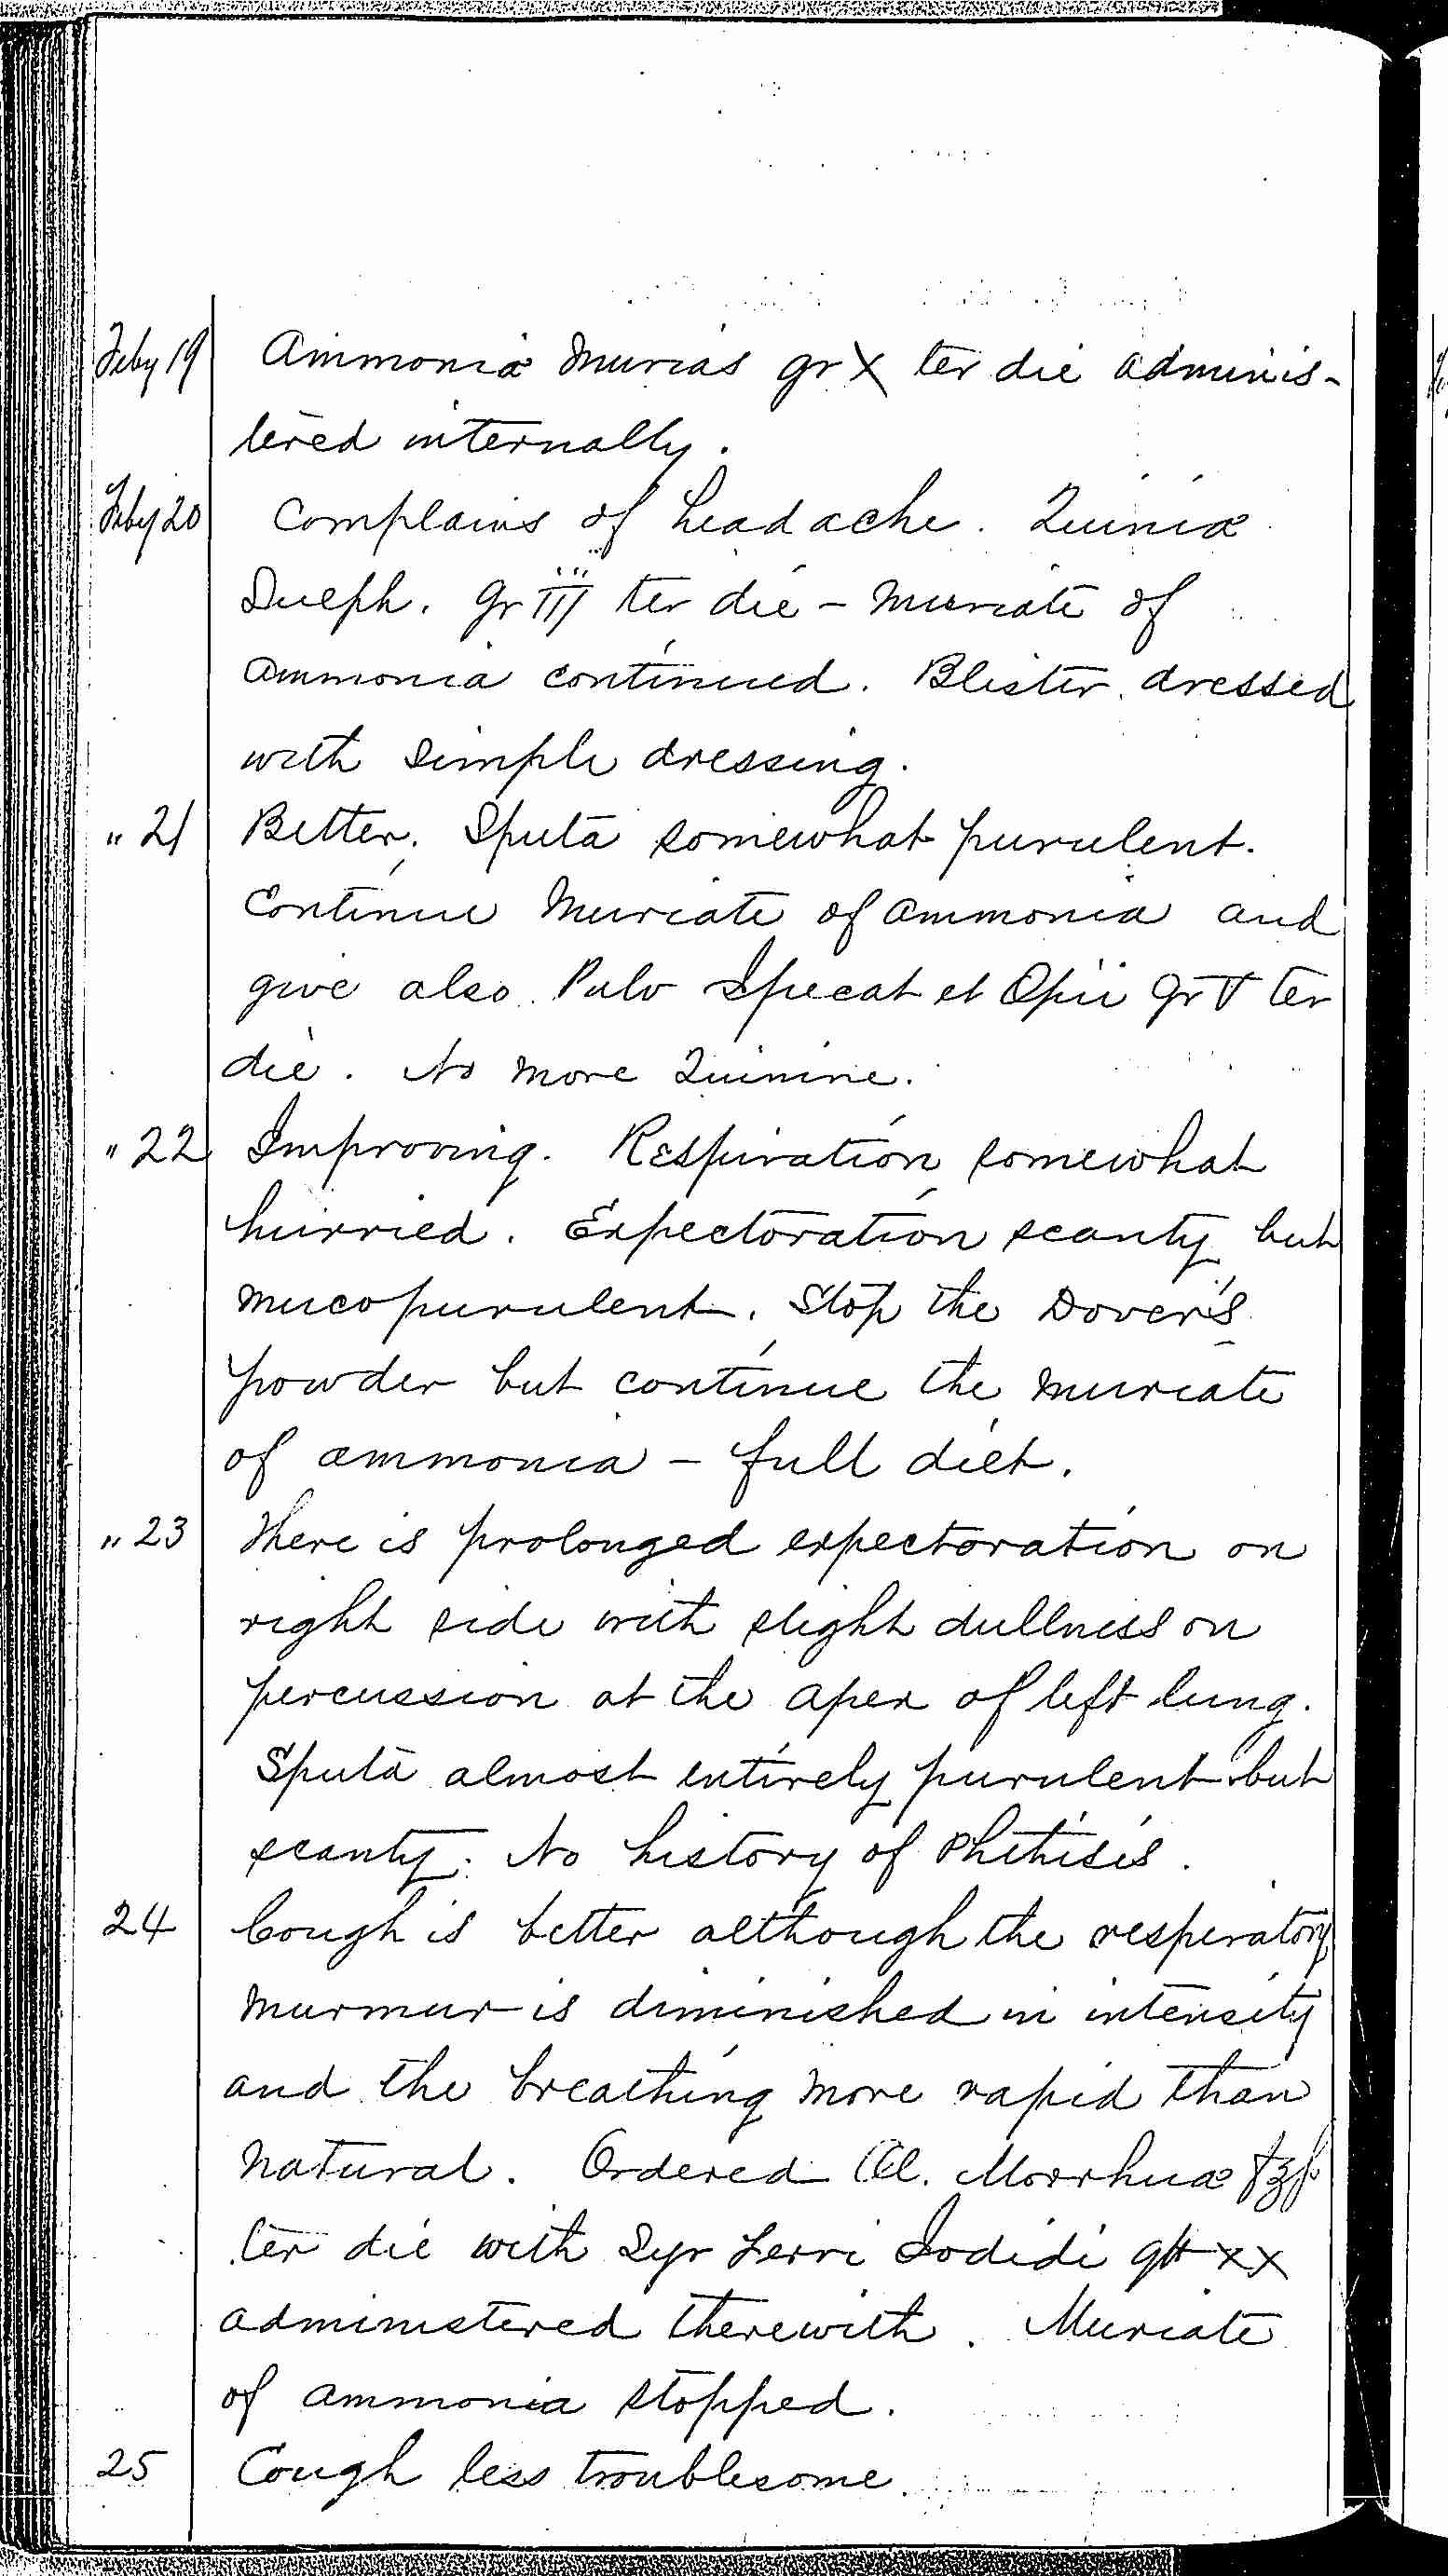 Entry for John Cadogan (page 2 of 3) in the log Hospital Tickets and Case Papers - Naval Hospital - Washington, D.C. - 1868-69